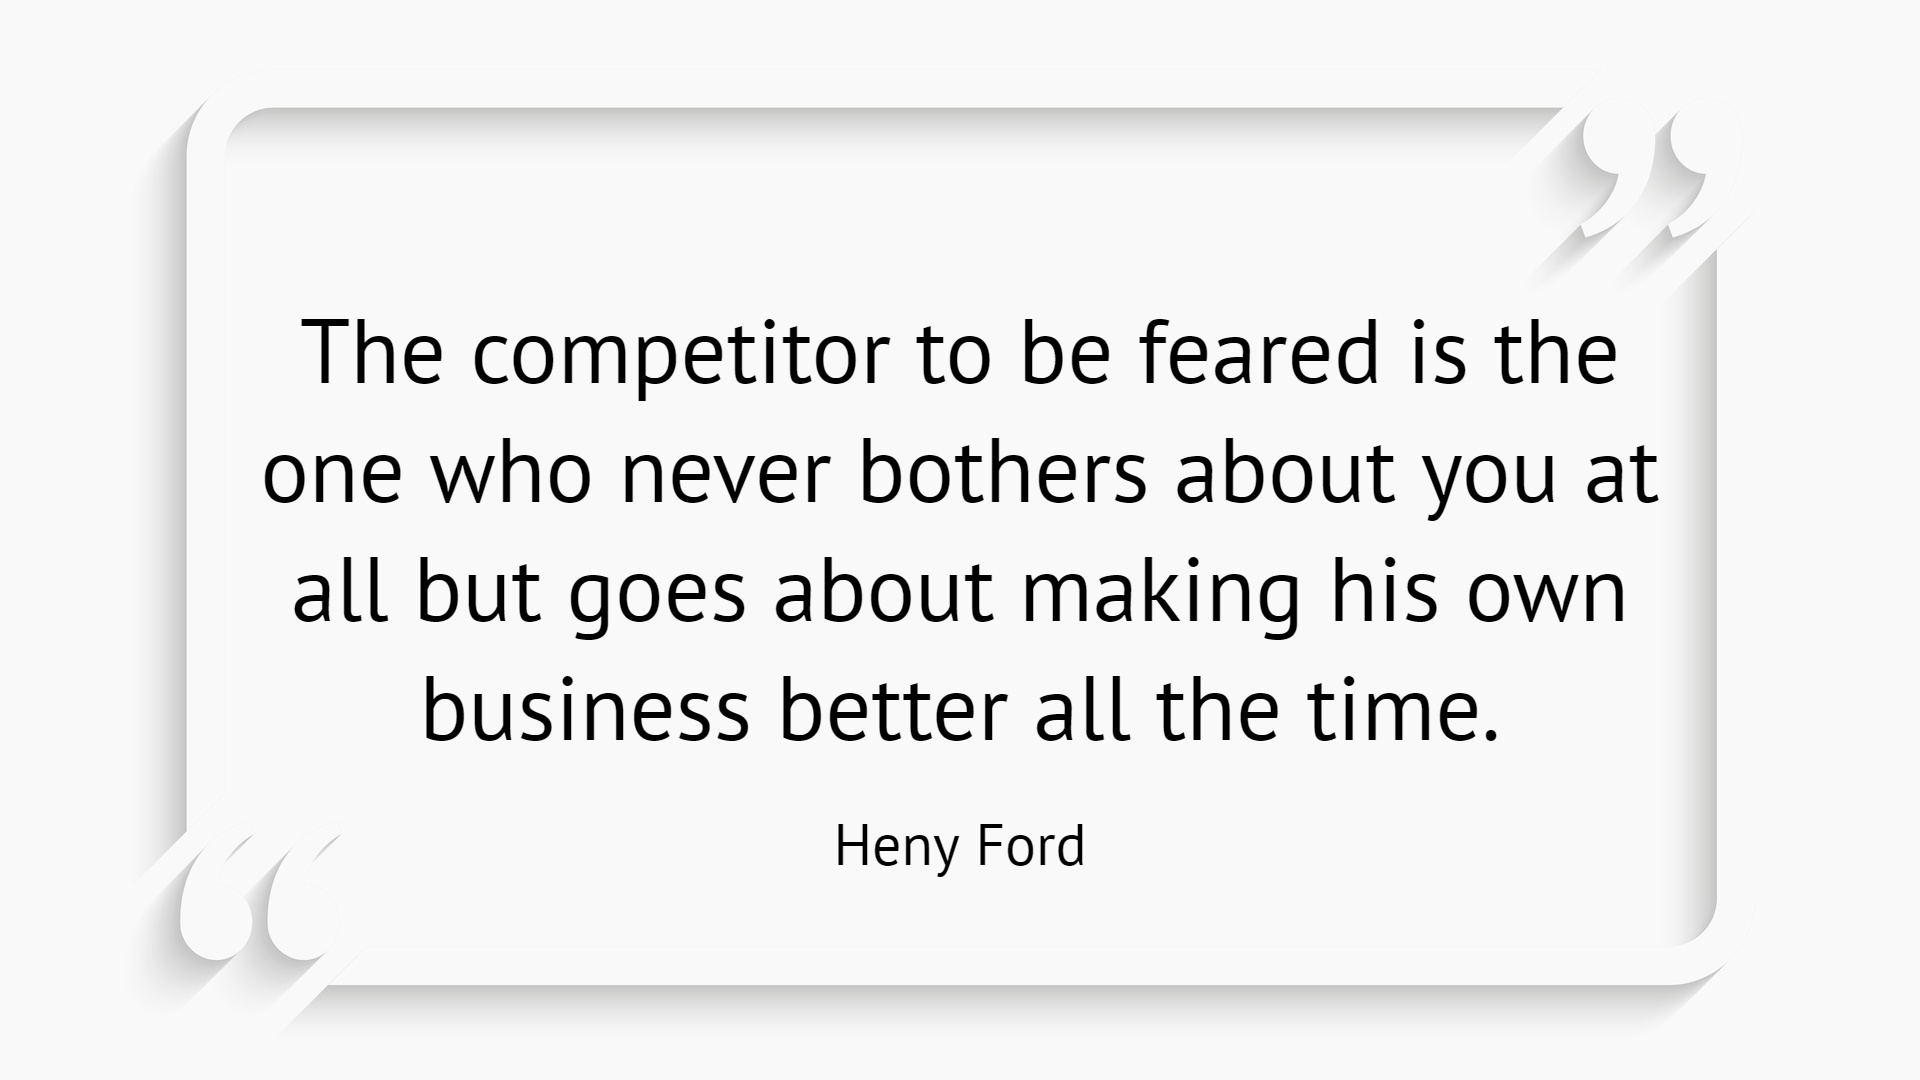 Henry Ford Competition Quote